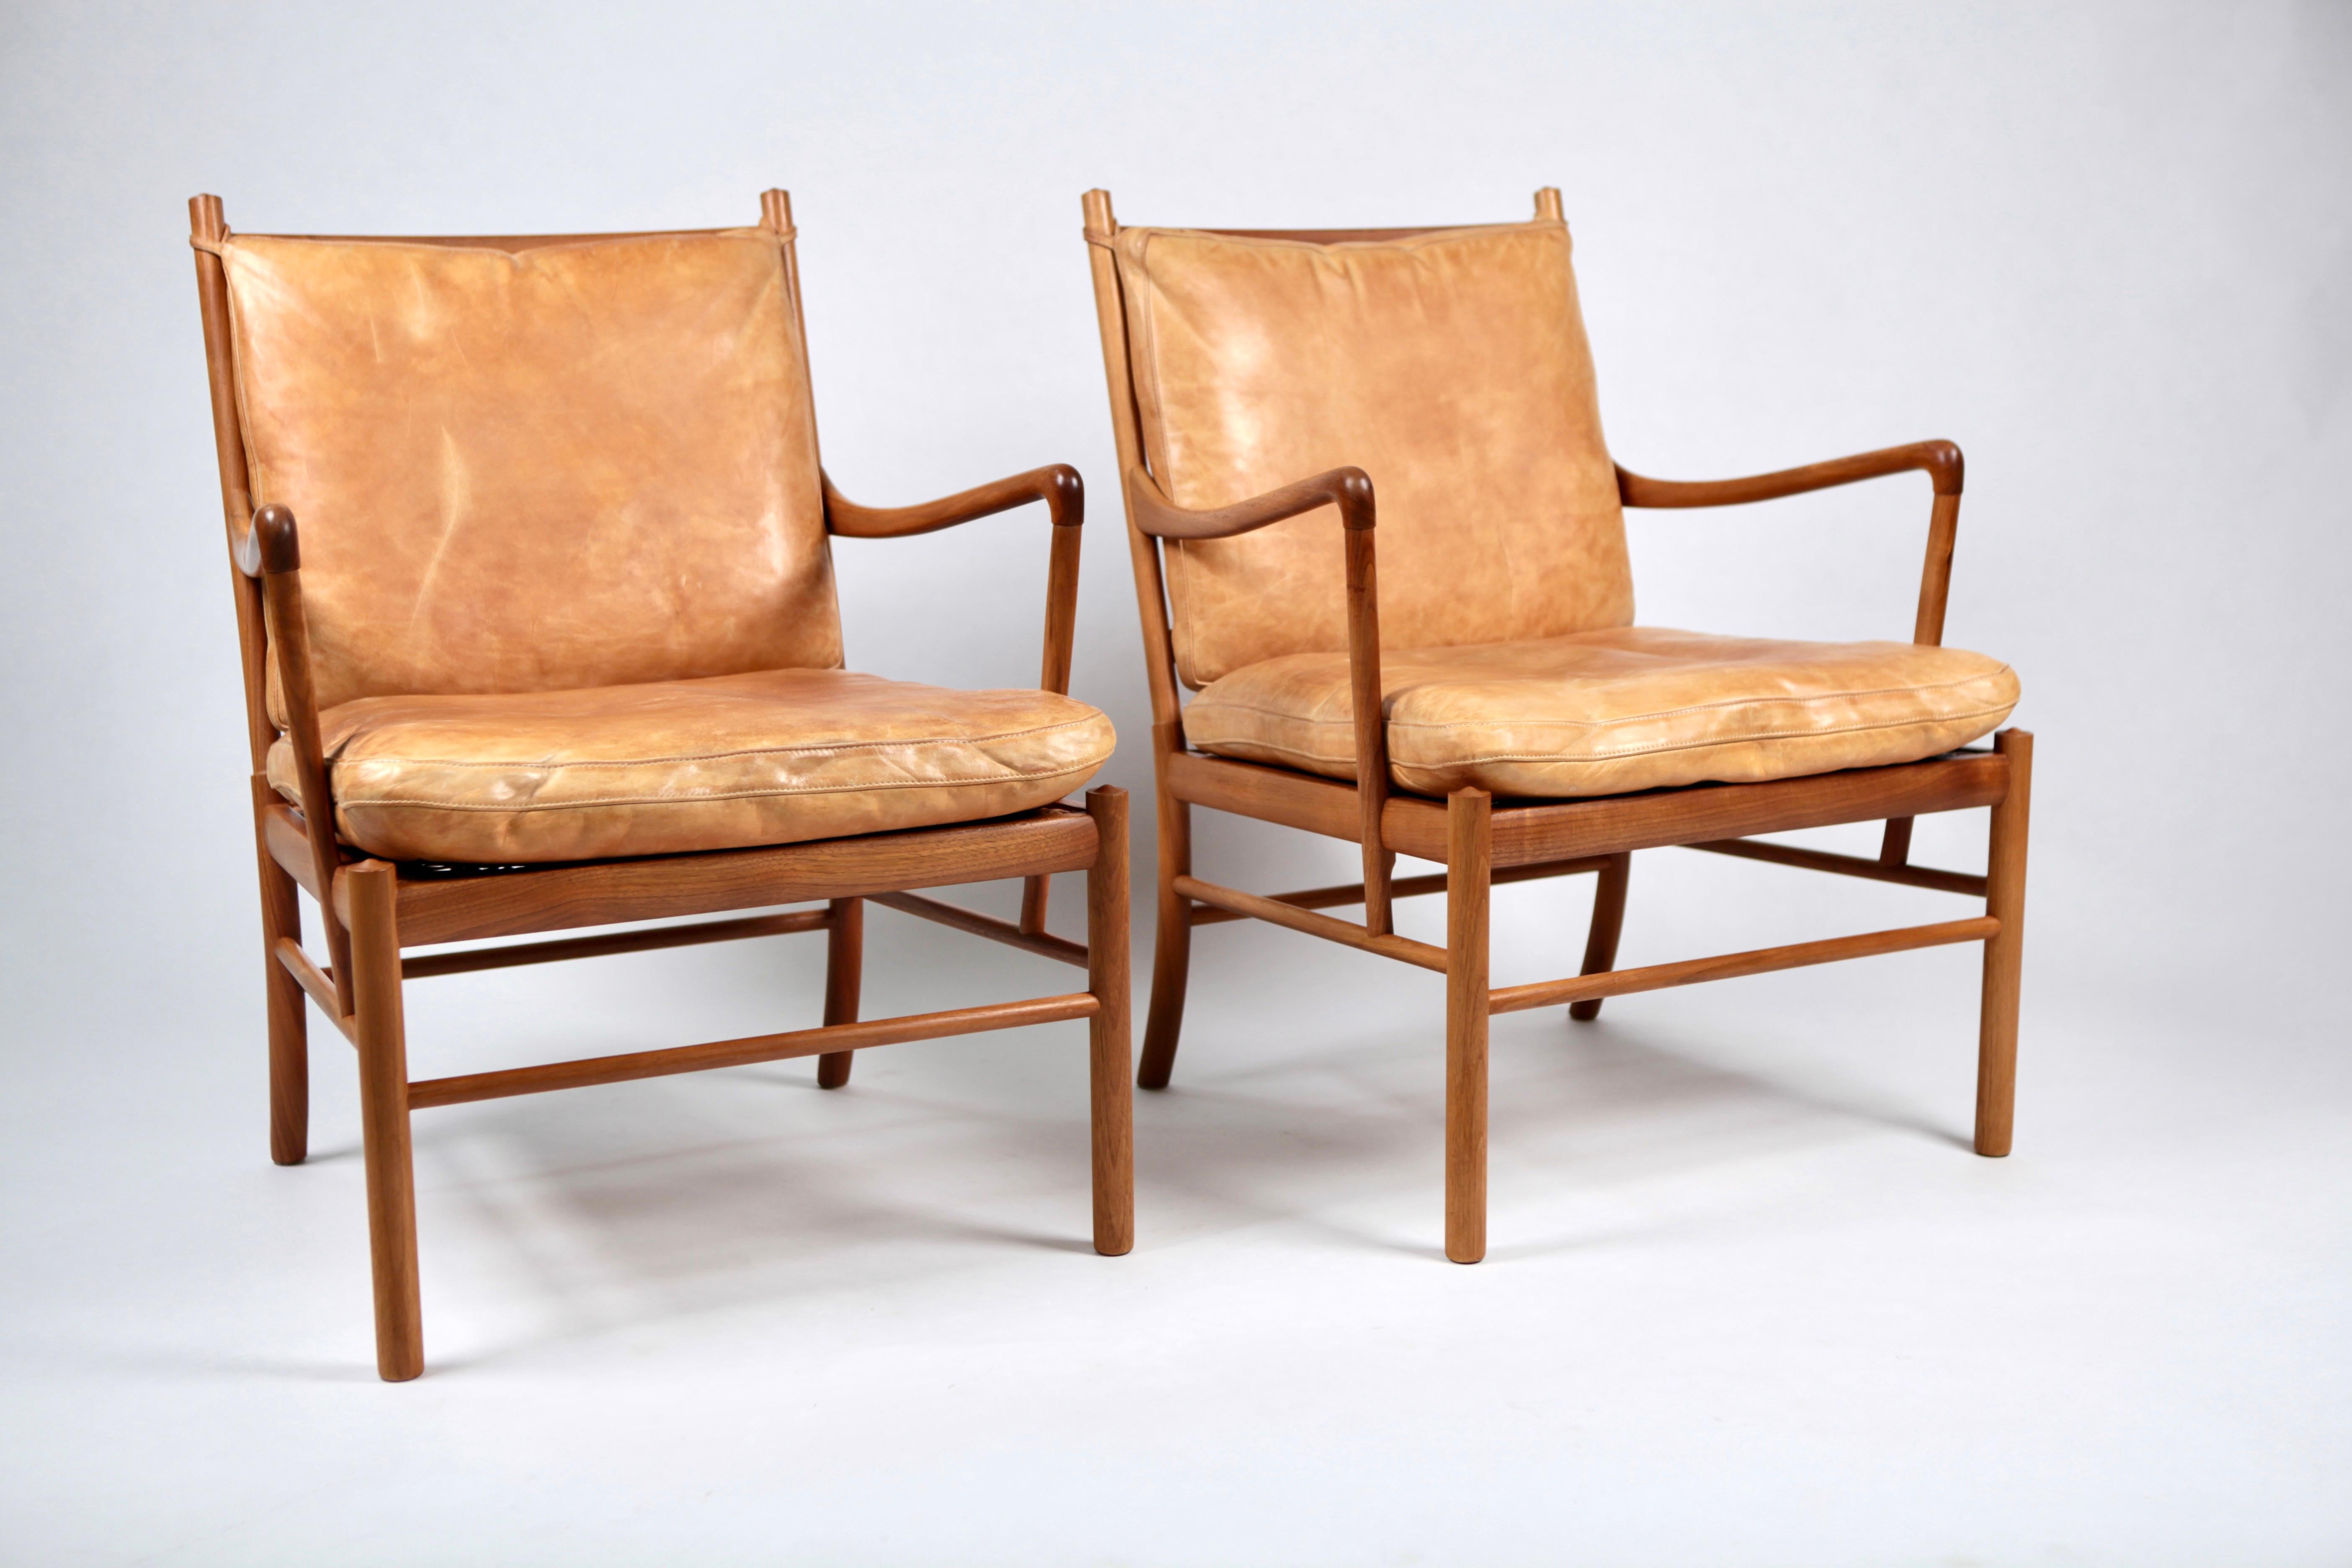 Probably the most iconic design by Ole Wanscher.
The PJ-149 'Colonial' chair, designed in 1949.
This set is executed in Mahogany in the 1960s, cane seating frames with original light Cognac colored, down filled leather cushions.
Produced by Poul